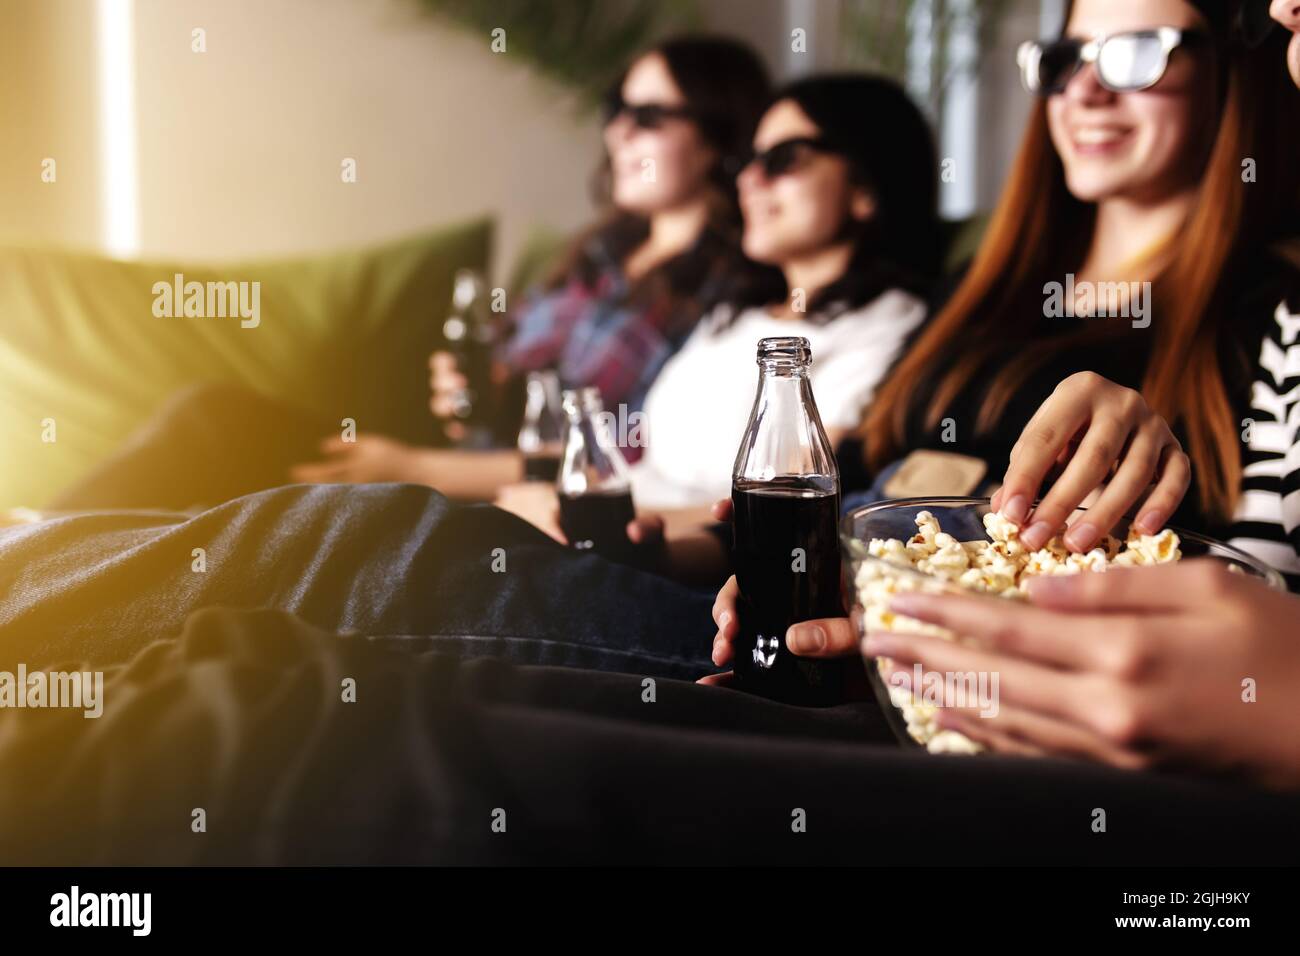 Group of people are watching a movie. Friend girls eat popcorn and drink soda Stock Photo